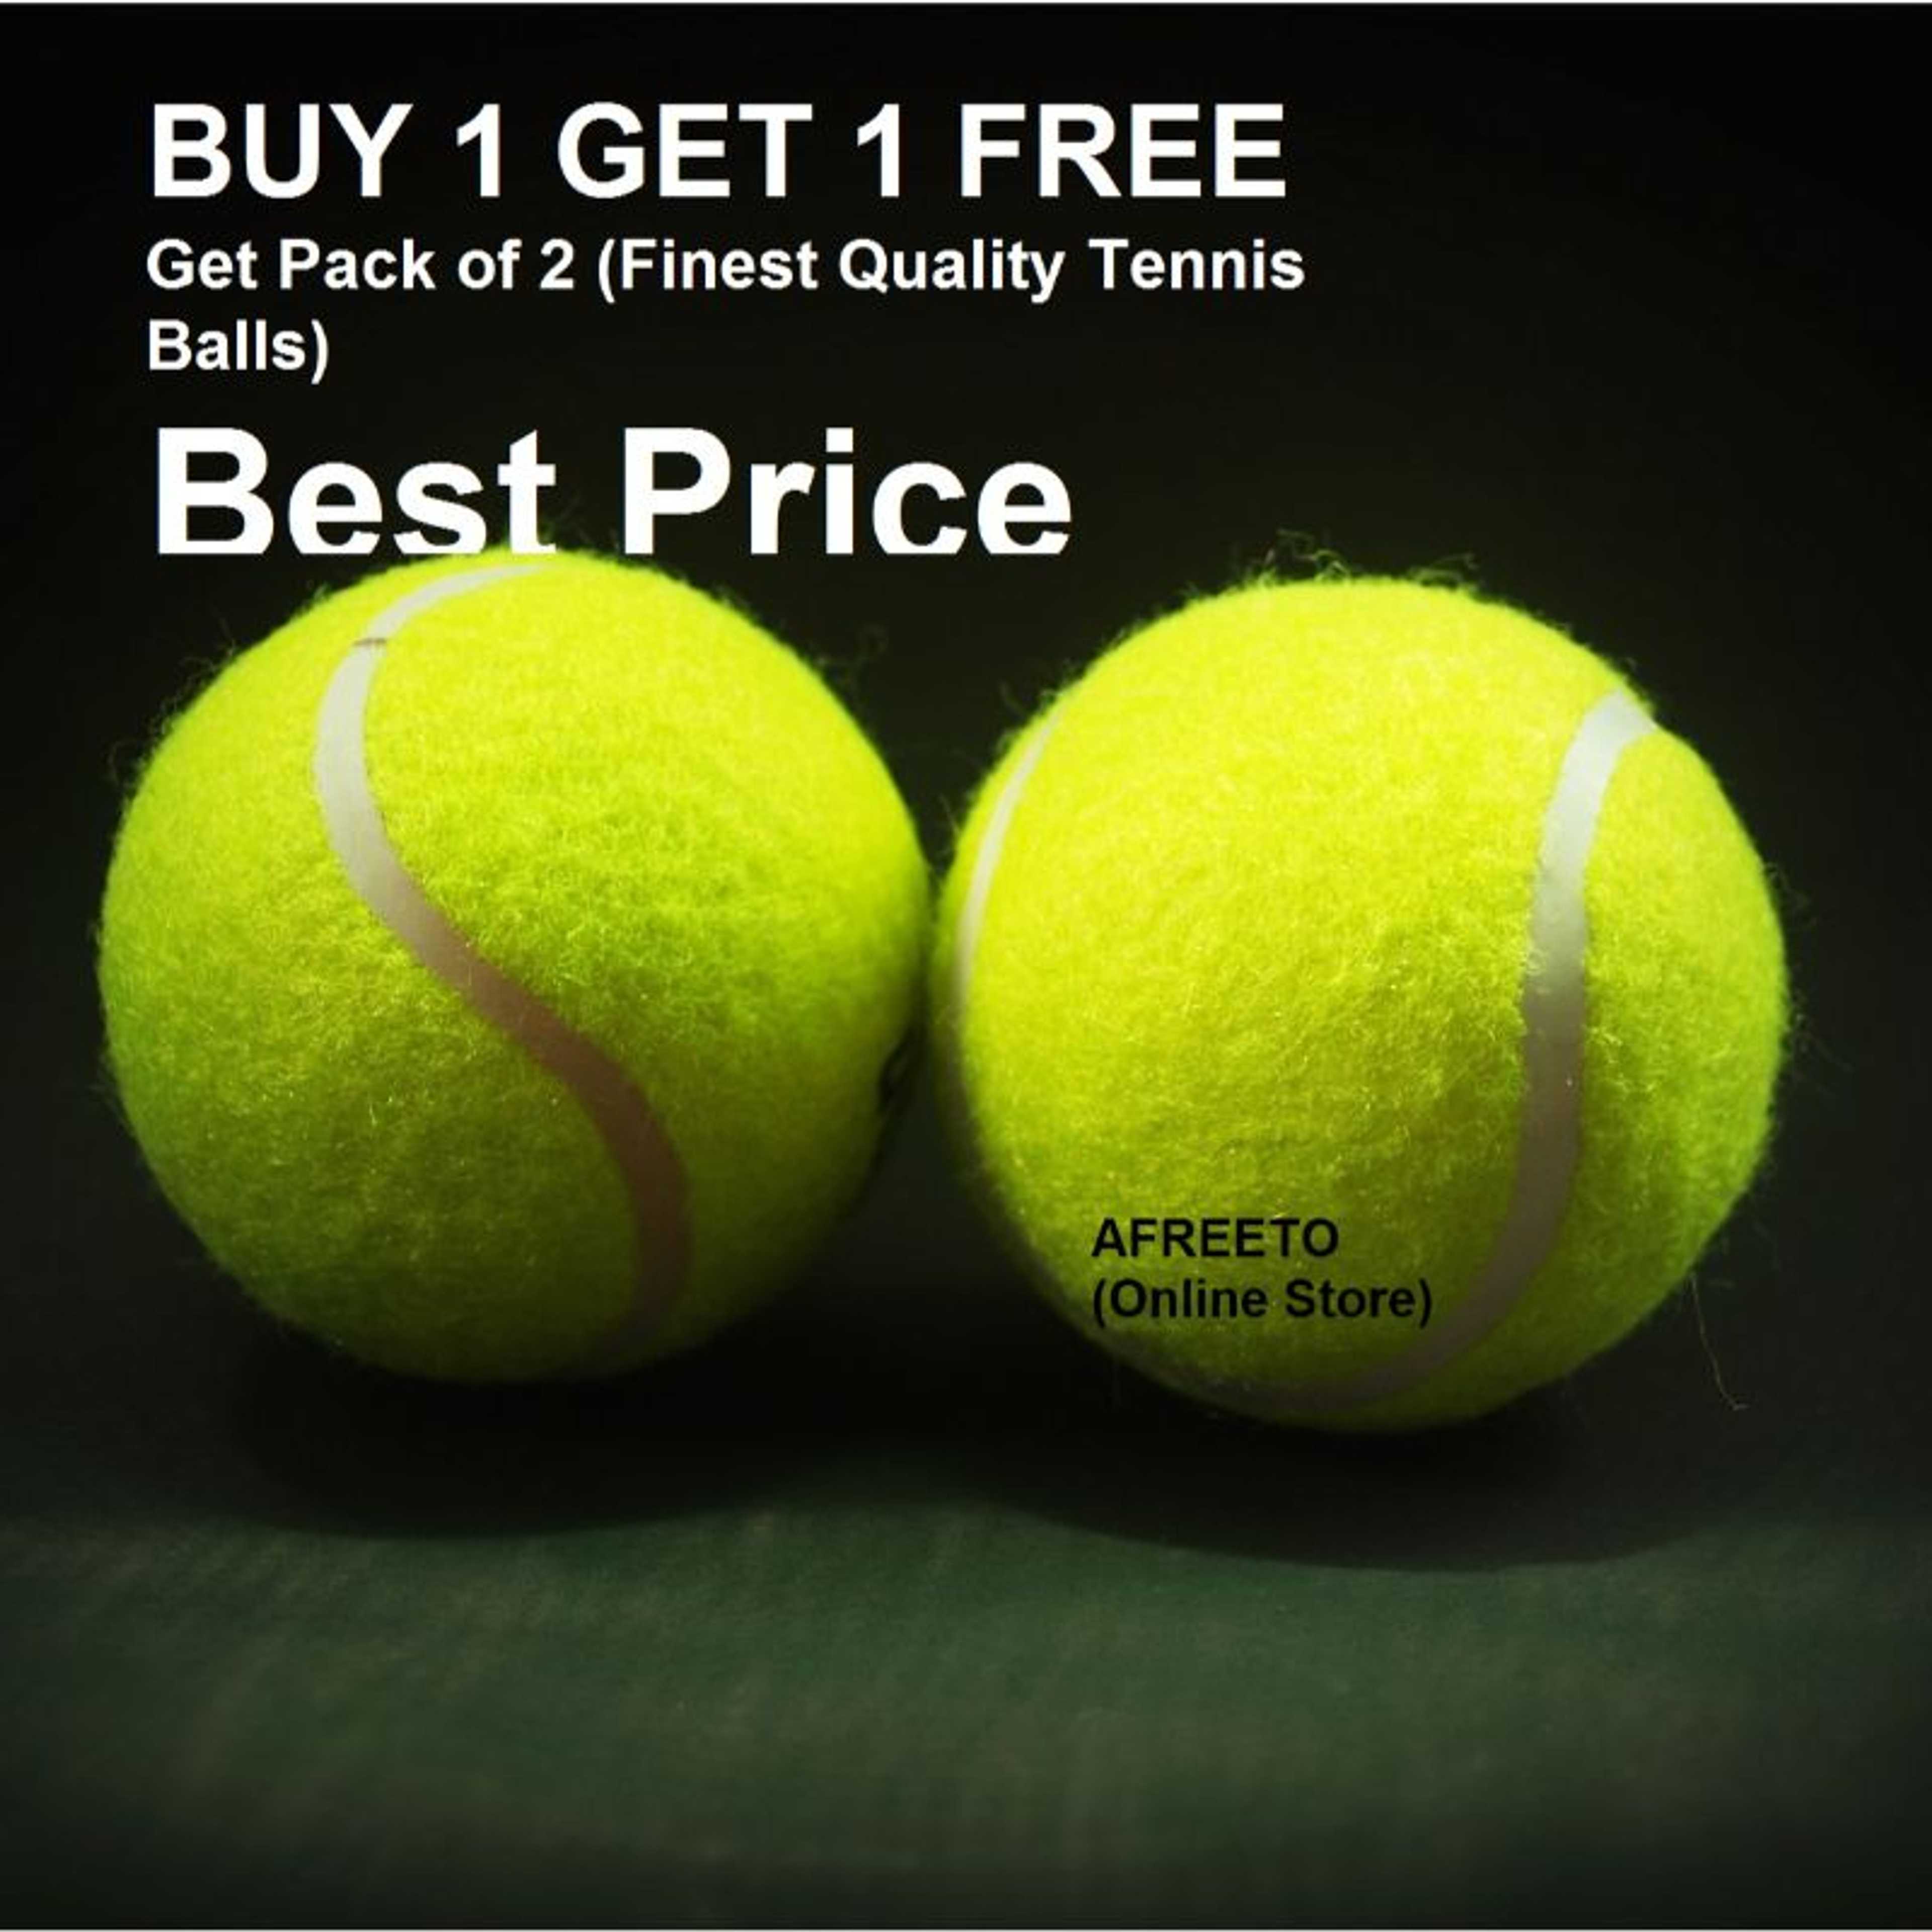 "Tennis Ball Pack of 2 Durable Practice Ball for Cricket & tennis. Professional Rubber tennis balls "